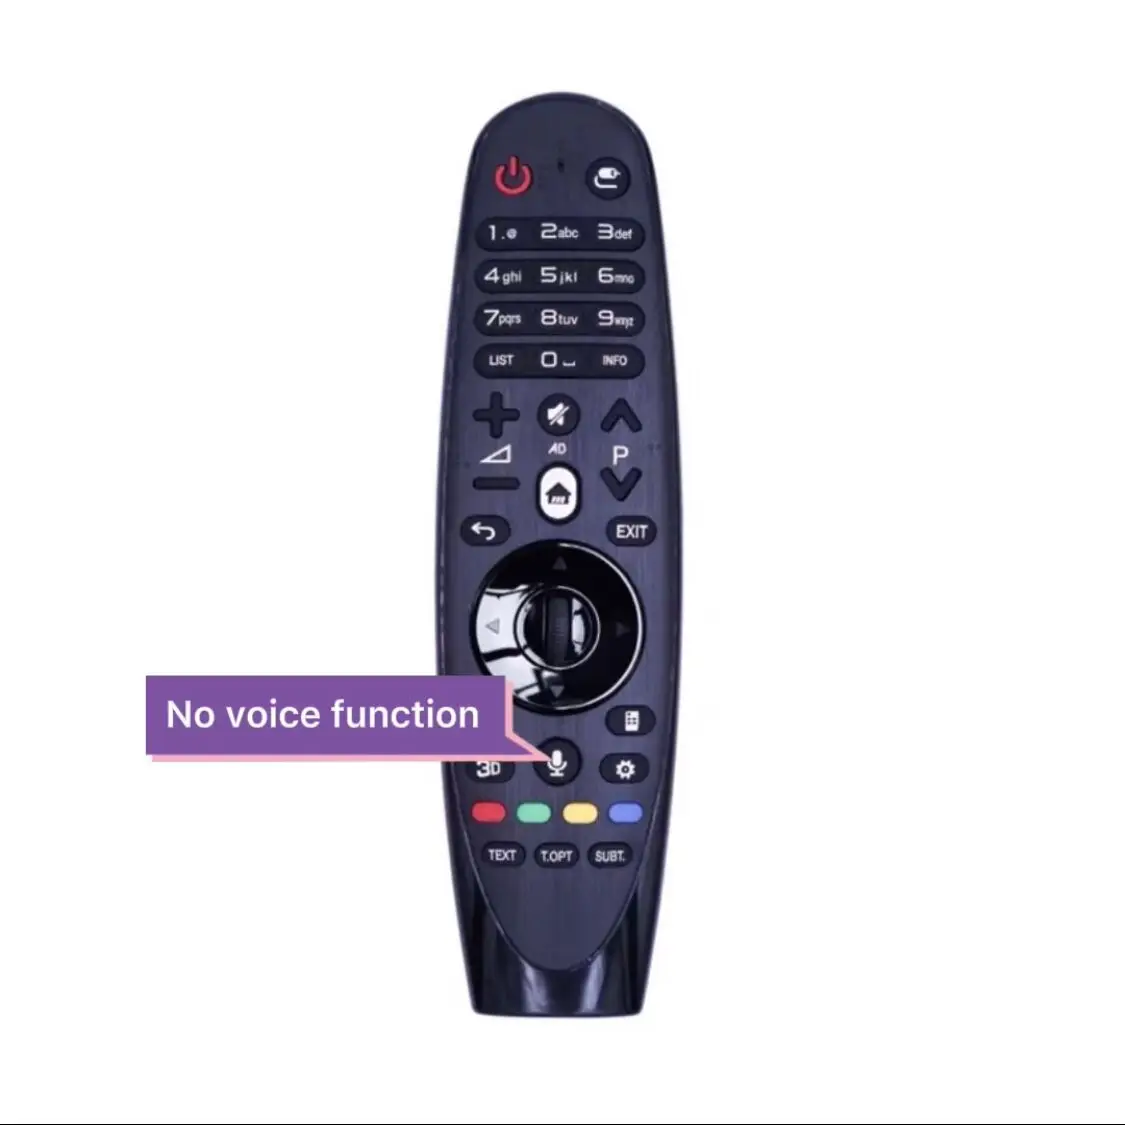 

No Magic Voice Replacement Remote Control AN-MR600 For LG AM-HR600 AN-MR600G AMHR600 ANMR600 AM-HR650A AN-MR650A Smart LED TV